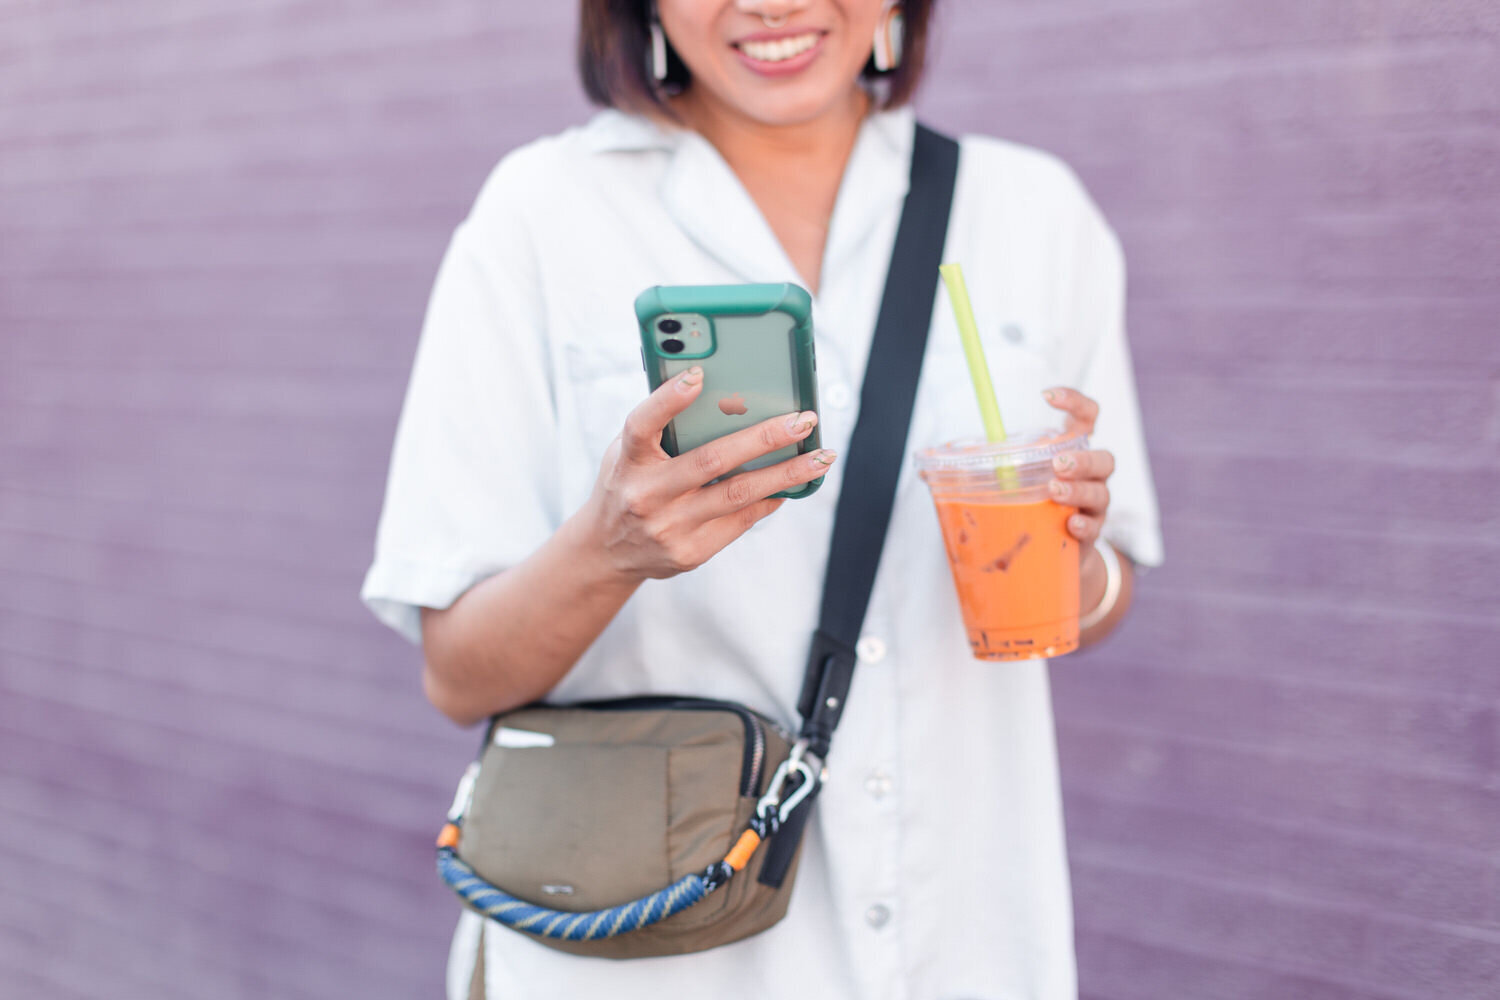 woman with a phone in one hand and an orange drink in the other